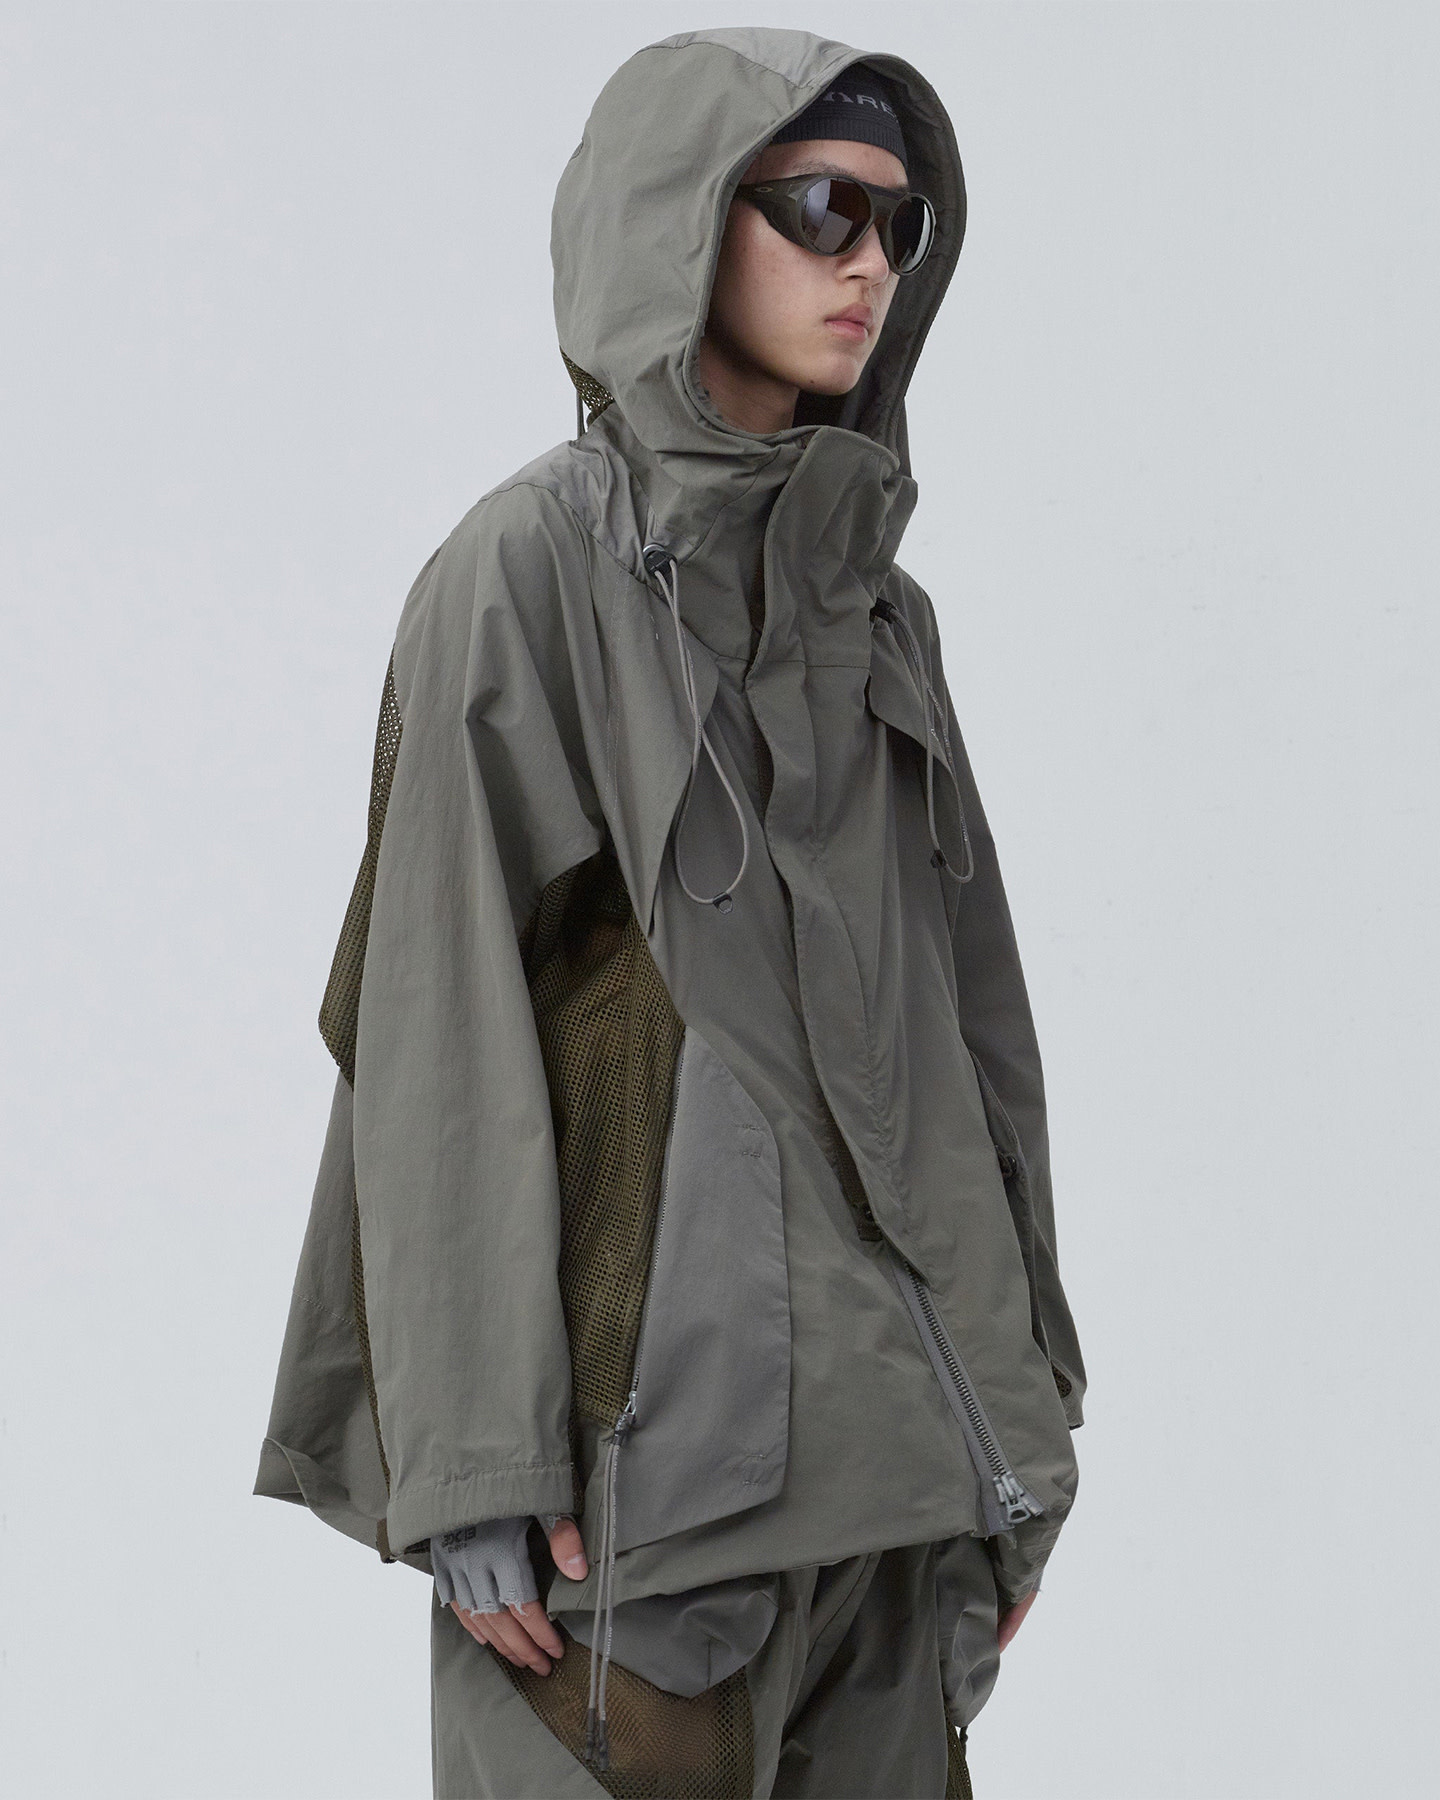 Edgeologist / Panel Ld Commute Parka - Green By Hamcus - Shop Untitled NYC